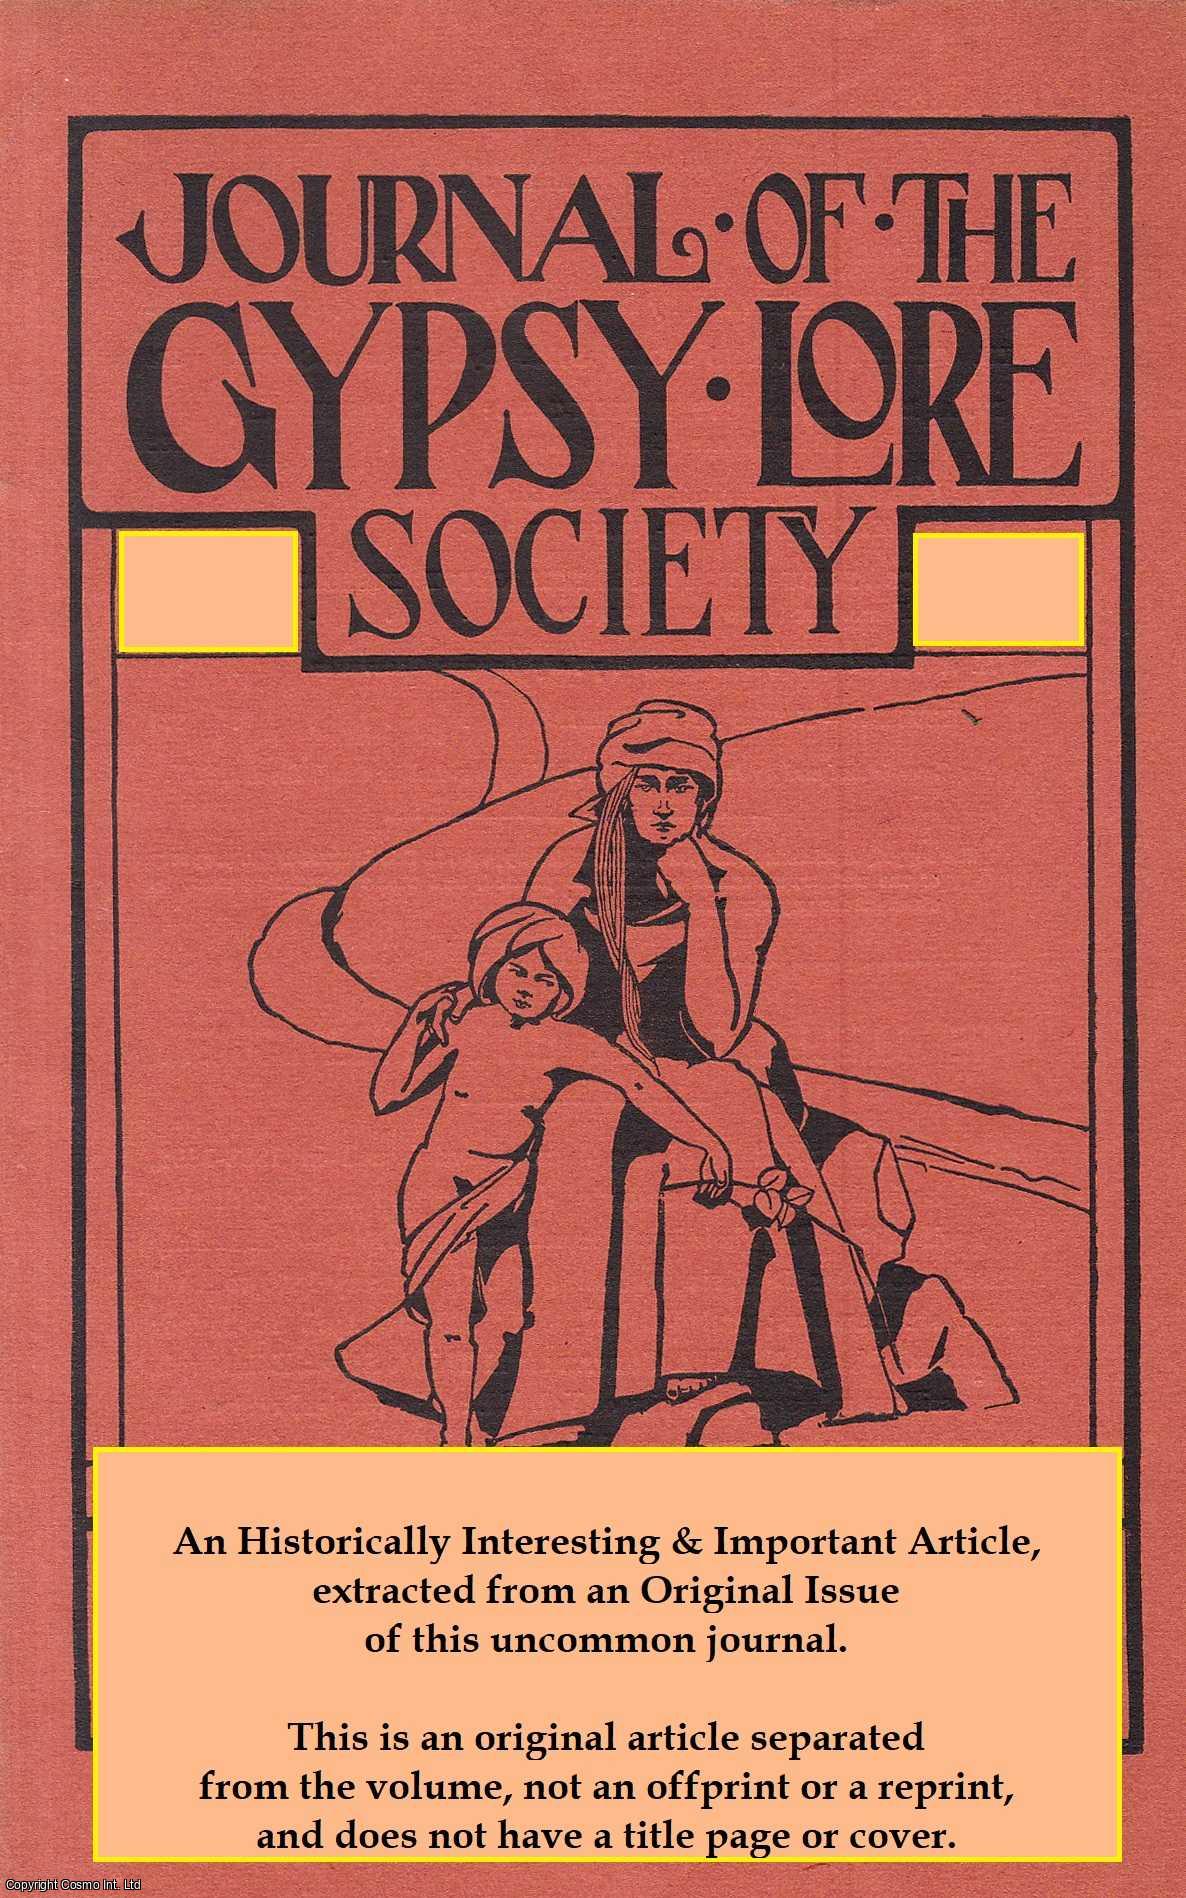 Rade Uhlik - The Tale of the Three Sisters: Gypsy Folk Tales. An uncommon original article from the Journal of the Gypsy Lore Society, 1958.